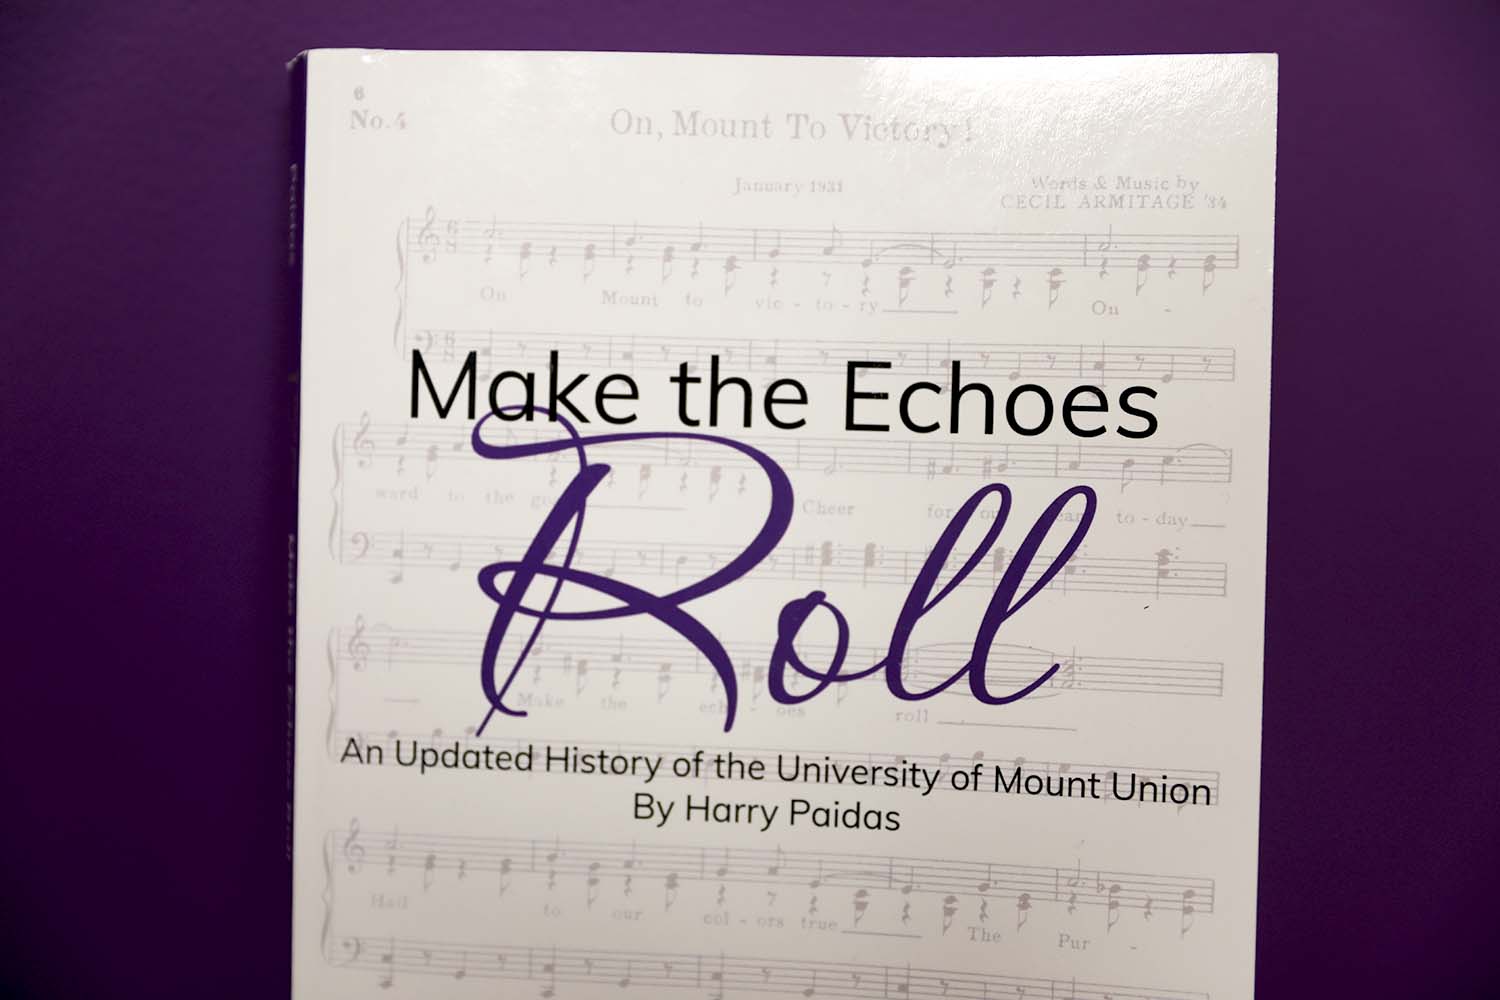 Updated Mount Union History Book “Make the Echoes Roll” Now Available to Purchase